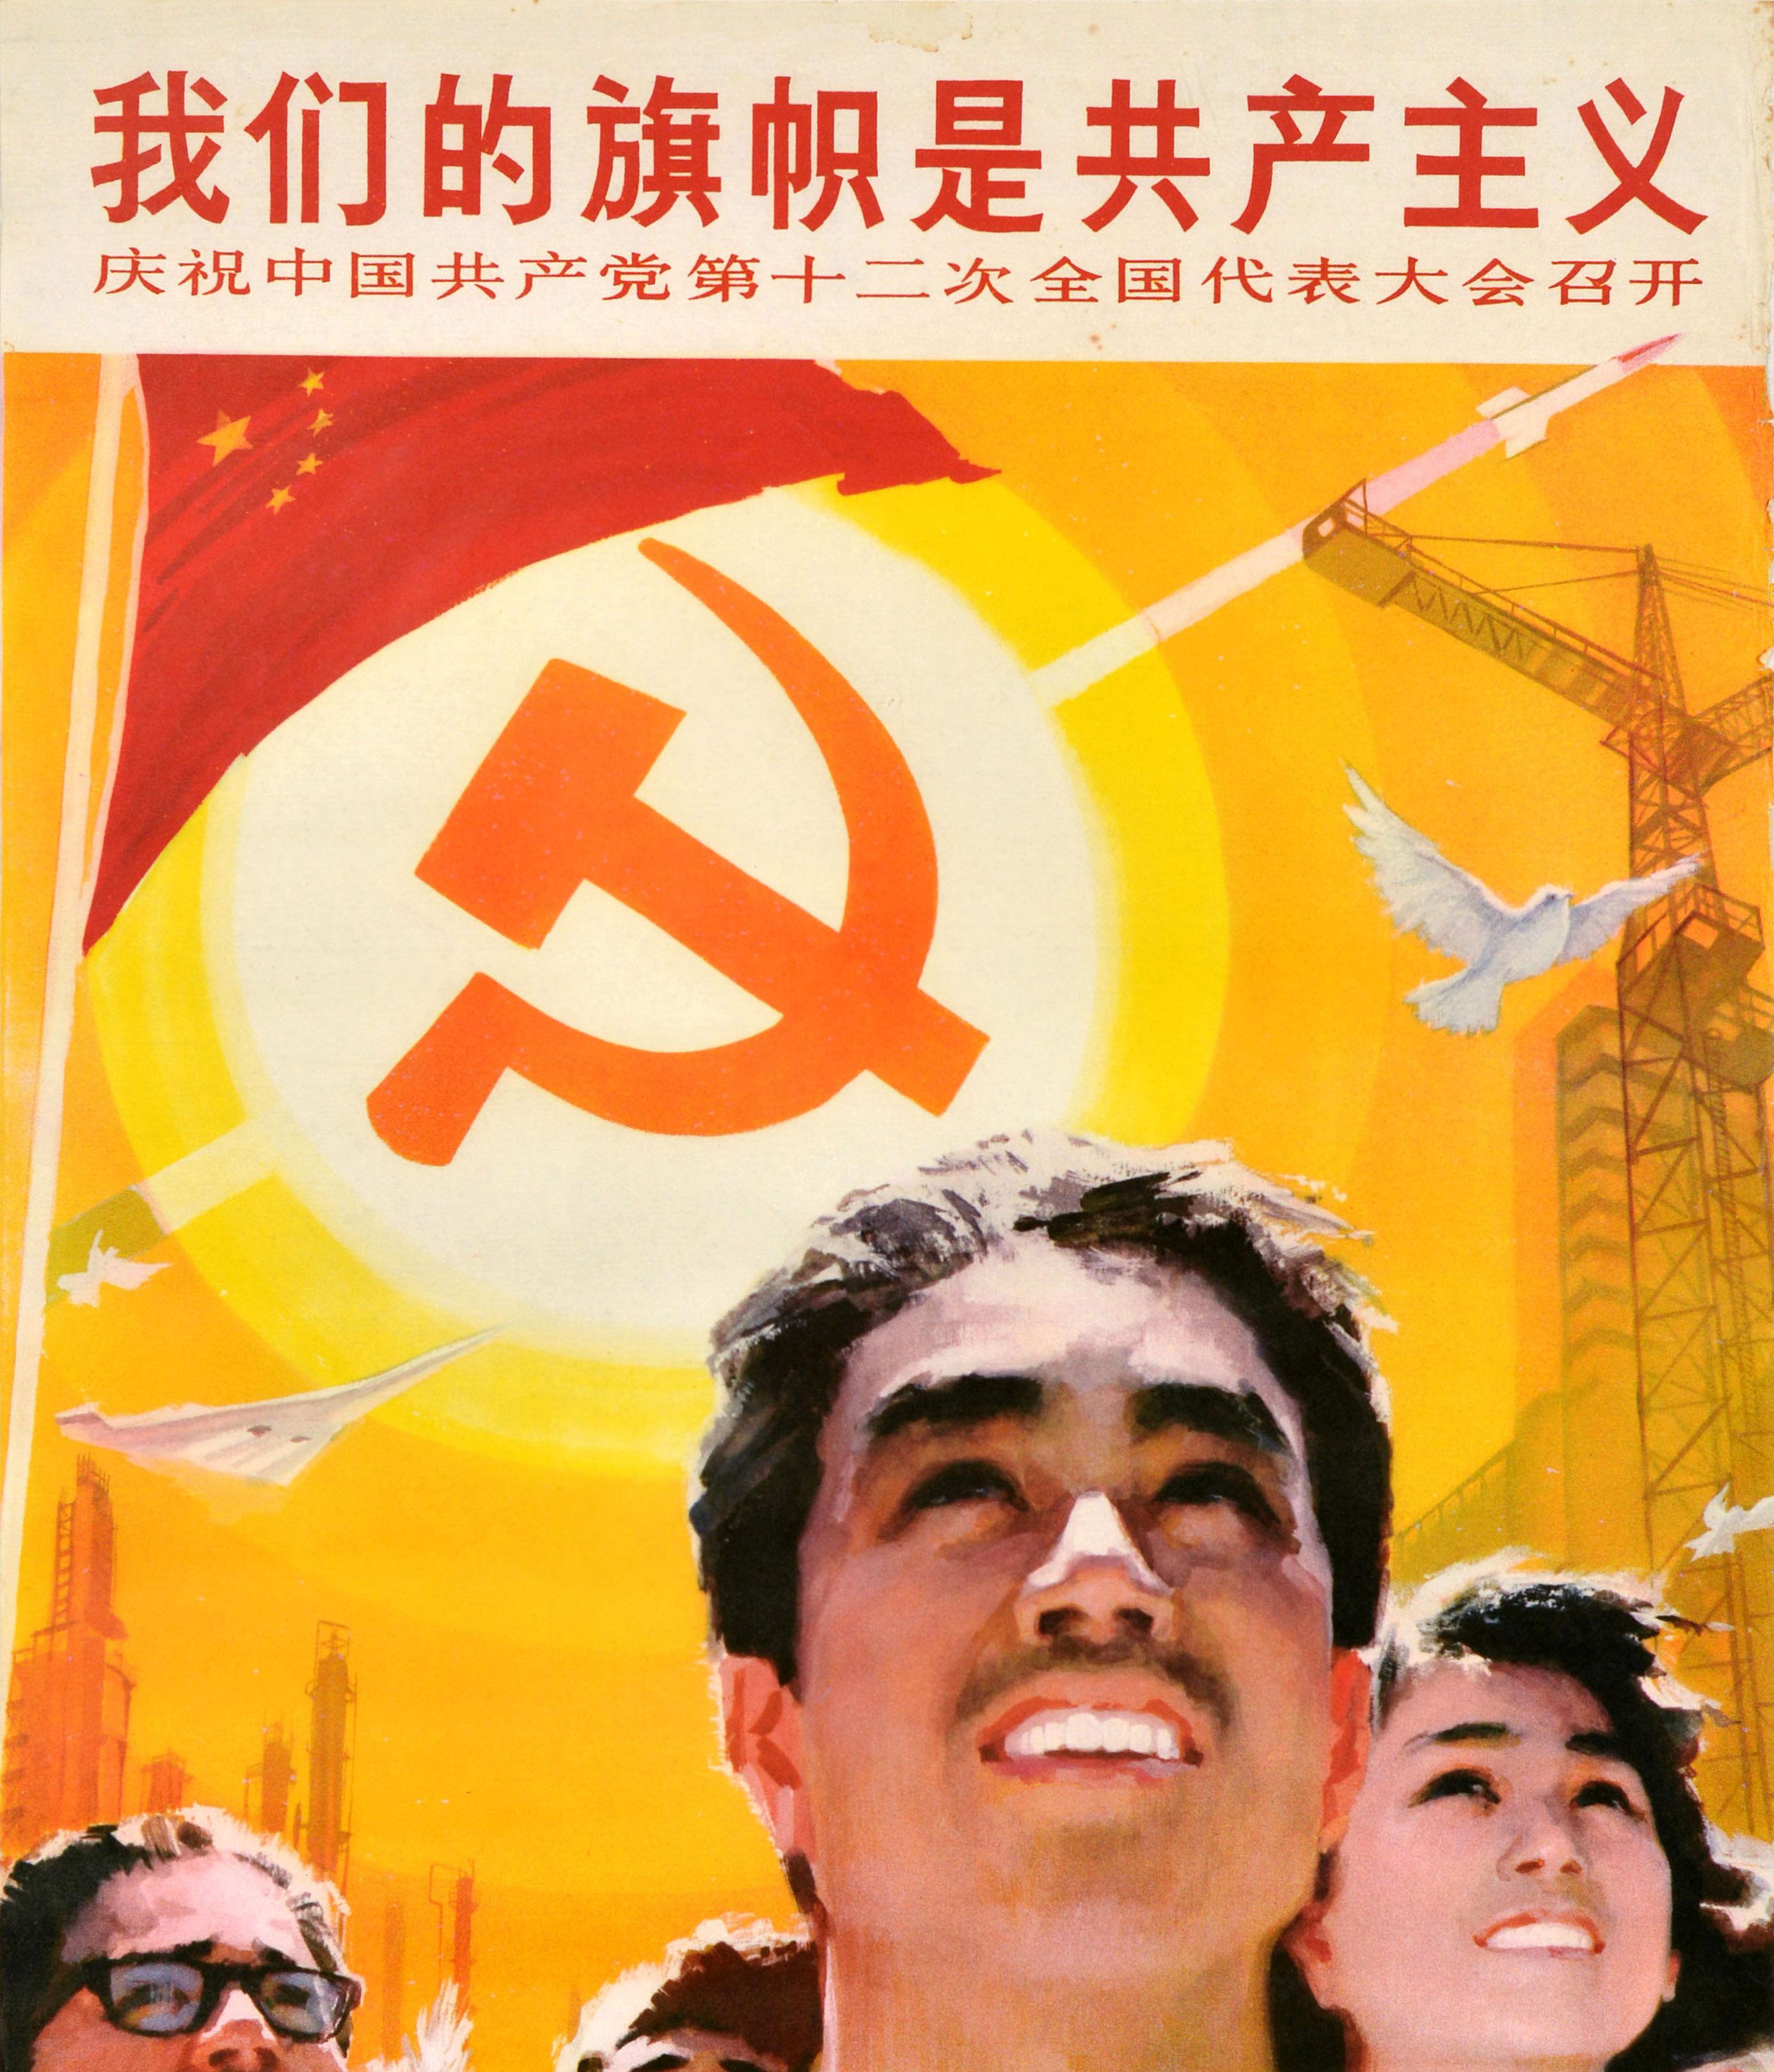 Original Vintage Chinese Communist Party Propaganda Poster Our Flag Is Communism - Orange Print by Unknown